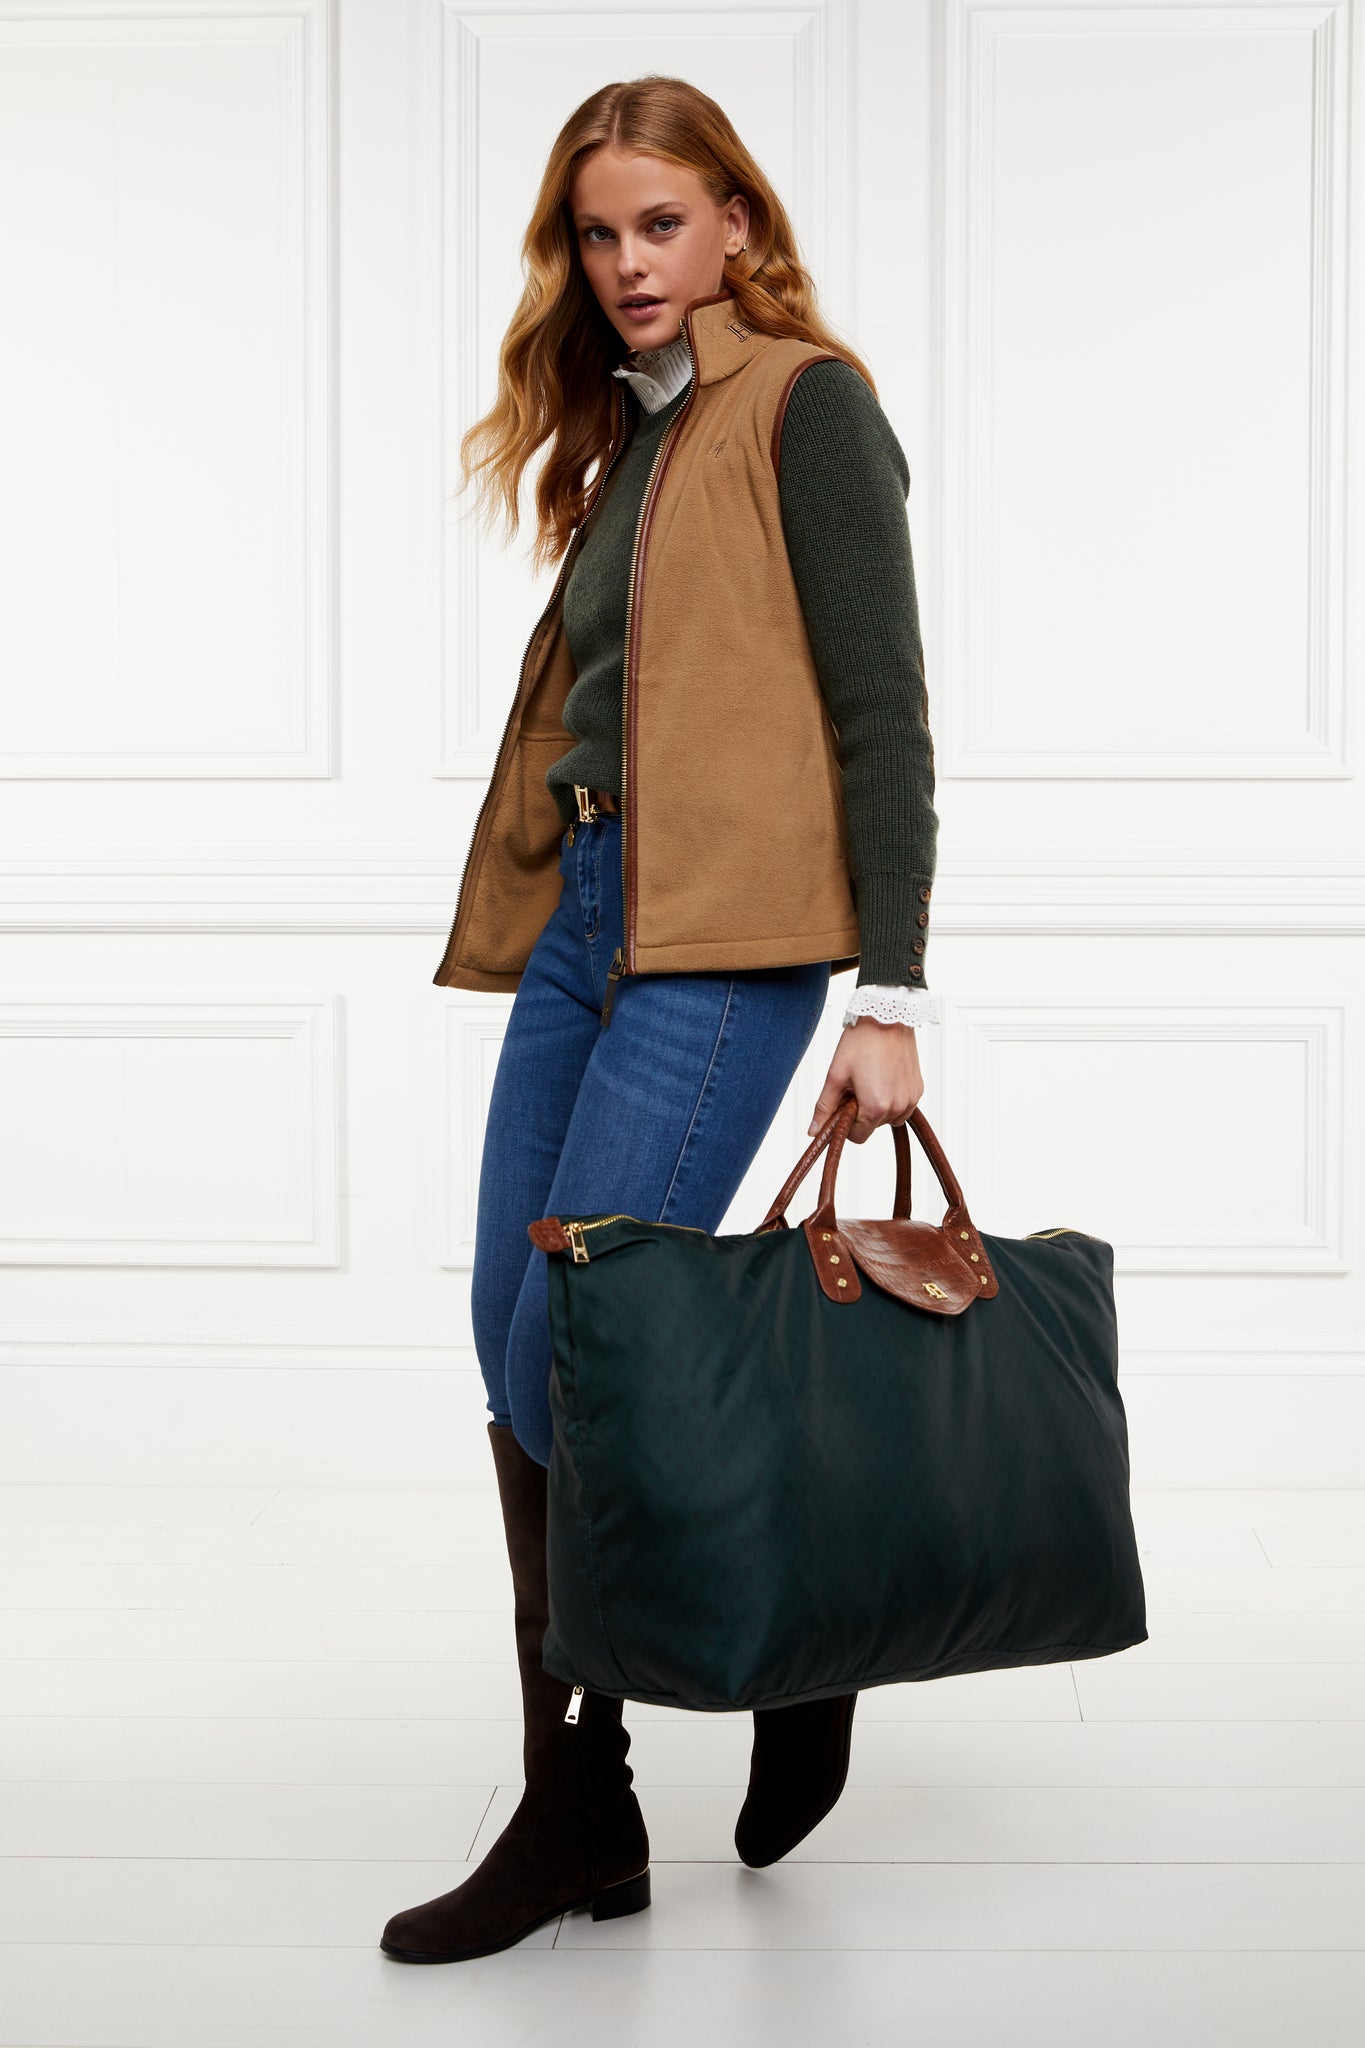 womens fleece gilet in light brown with dark brown leather piping around armholes neckline and down the front zip fastening a dark green knitted sweatshirt a white long sleeve shirt dark denim skinny jeans a dark green holdall and black suede knee high boots